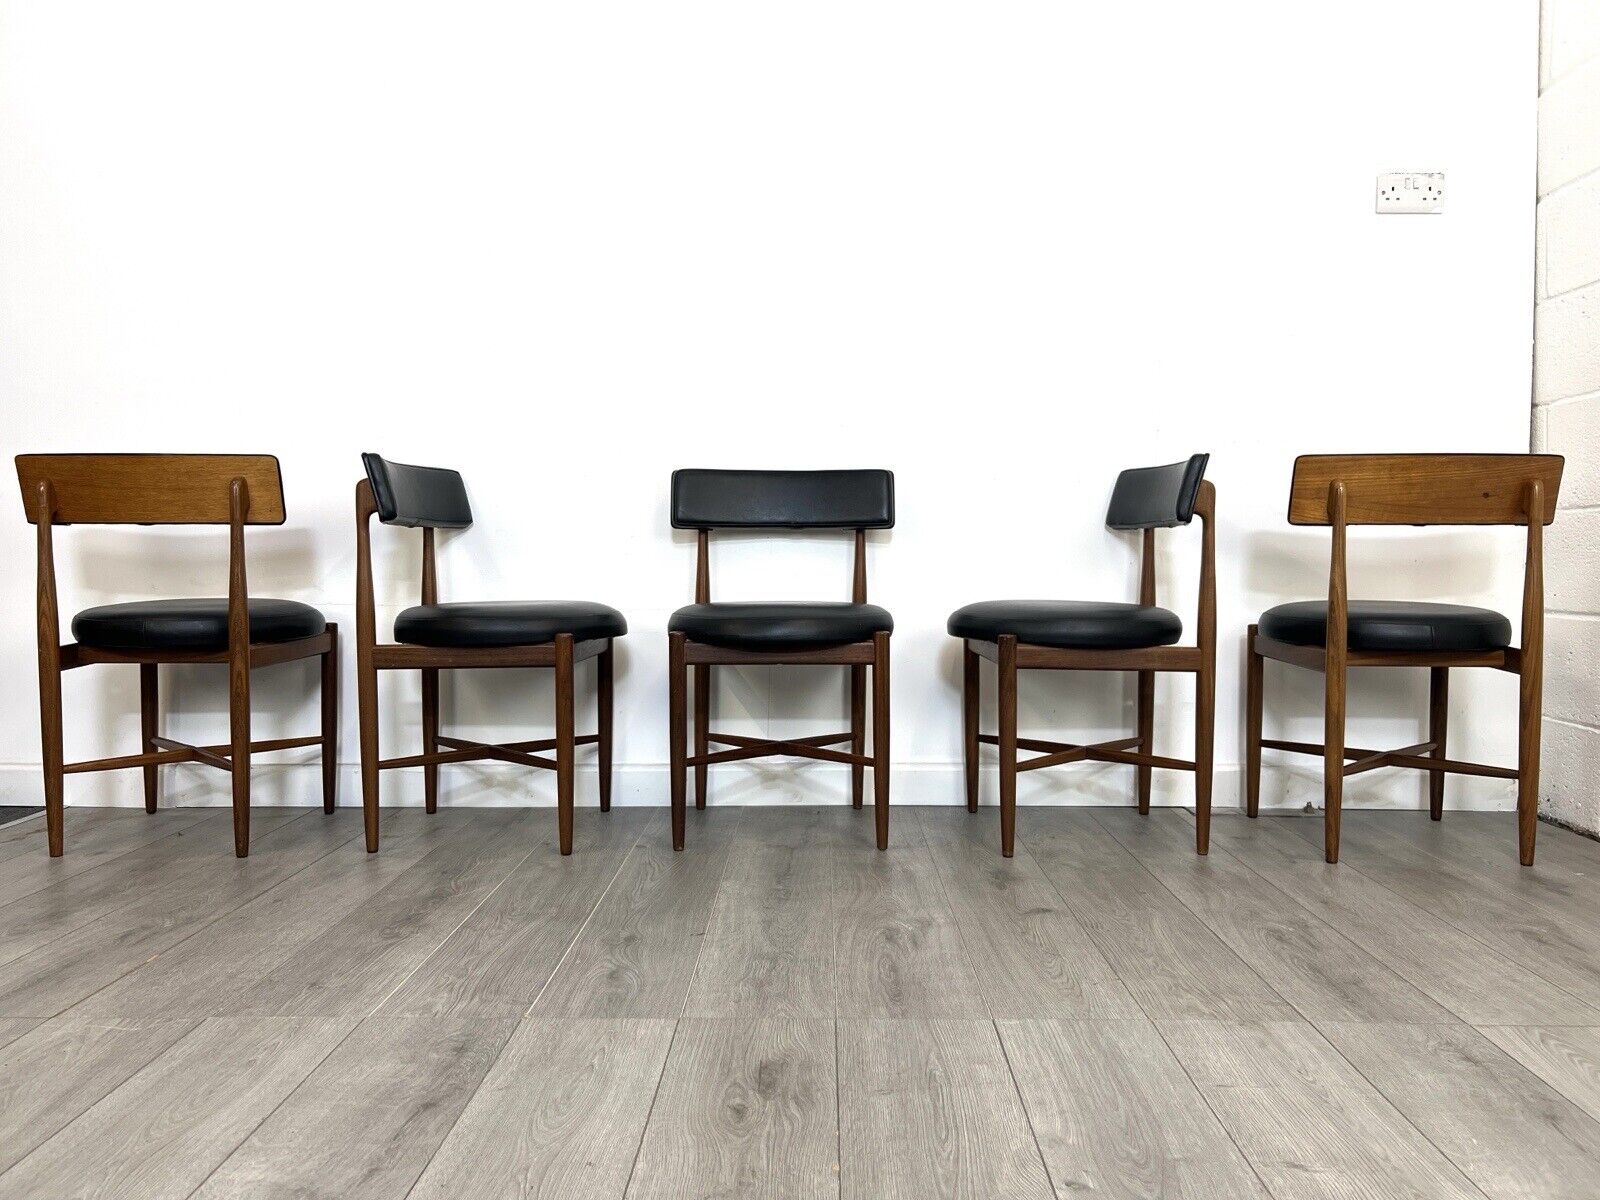 G Plan Fresco, Mid Century Set of 5 Teak and Leatherette Dining Chairs